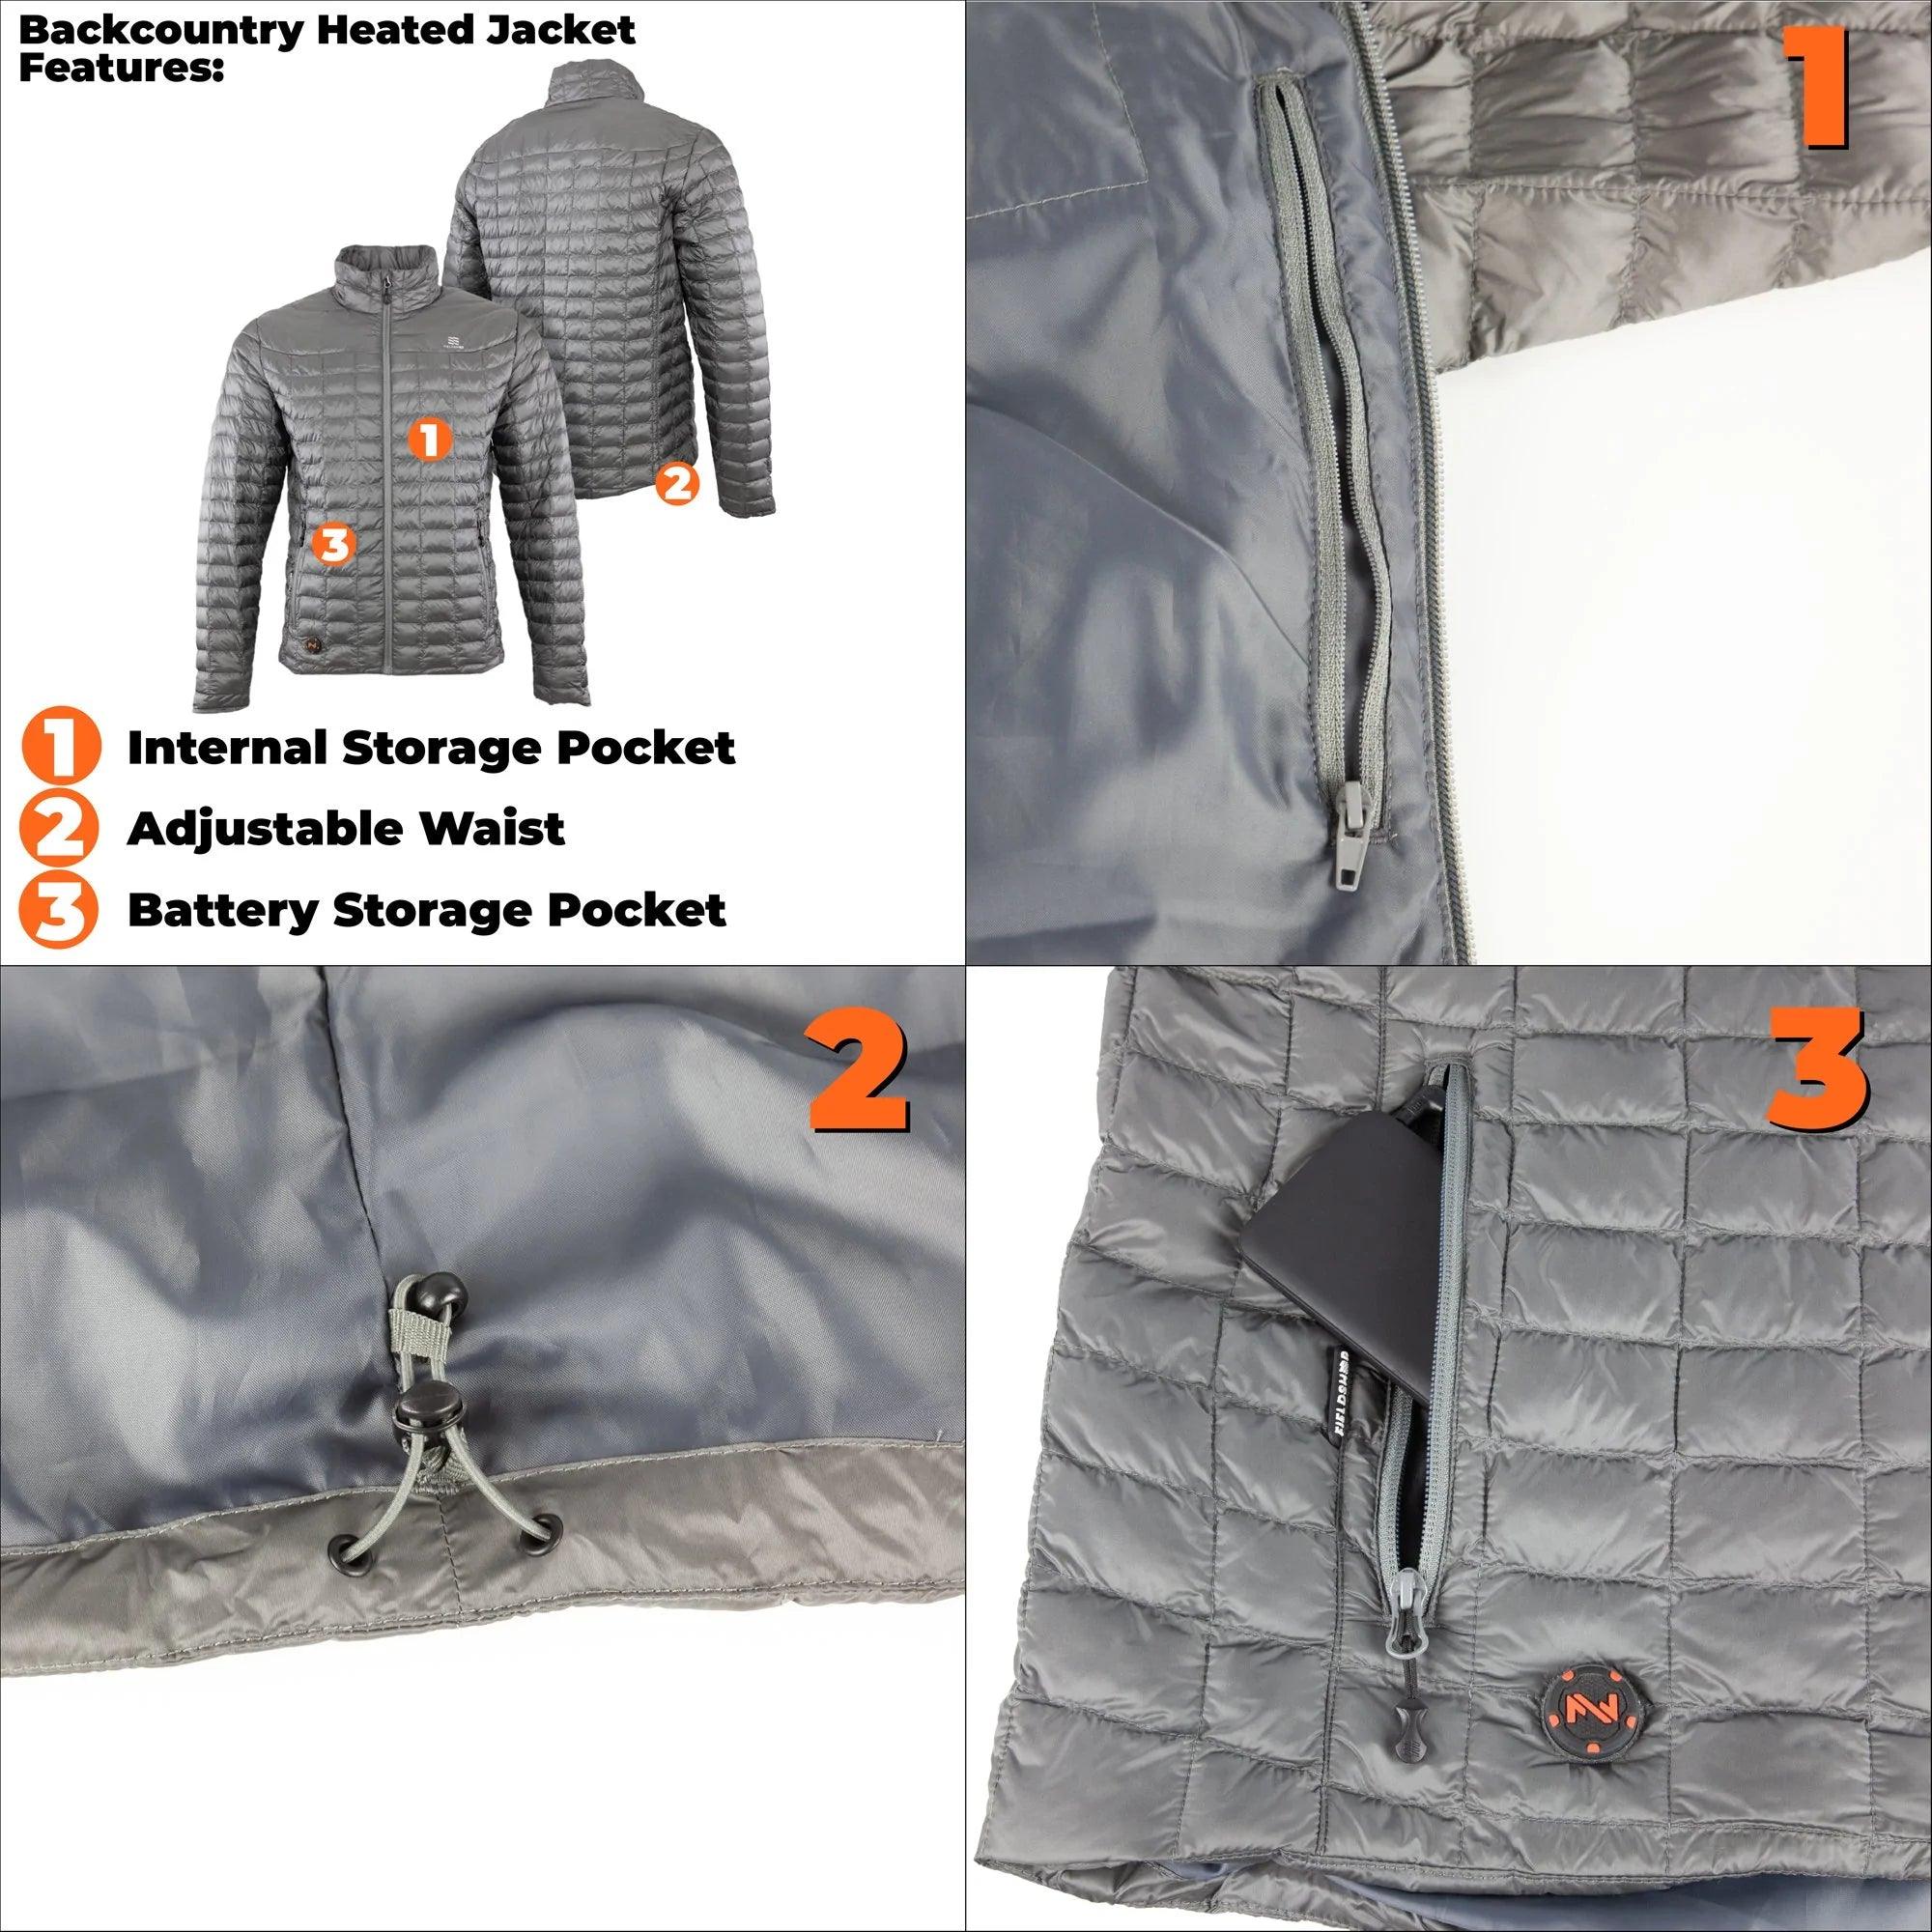 Fieldsheer Backcountry Heated Jacket Men's - Leapfrog Outdoor Sports and Apparel